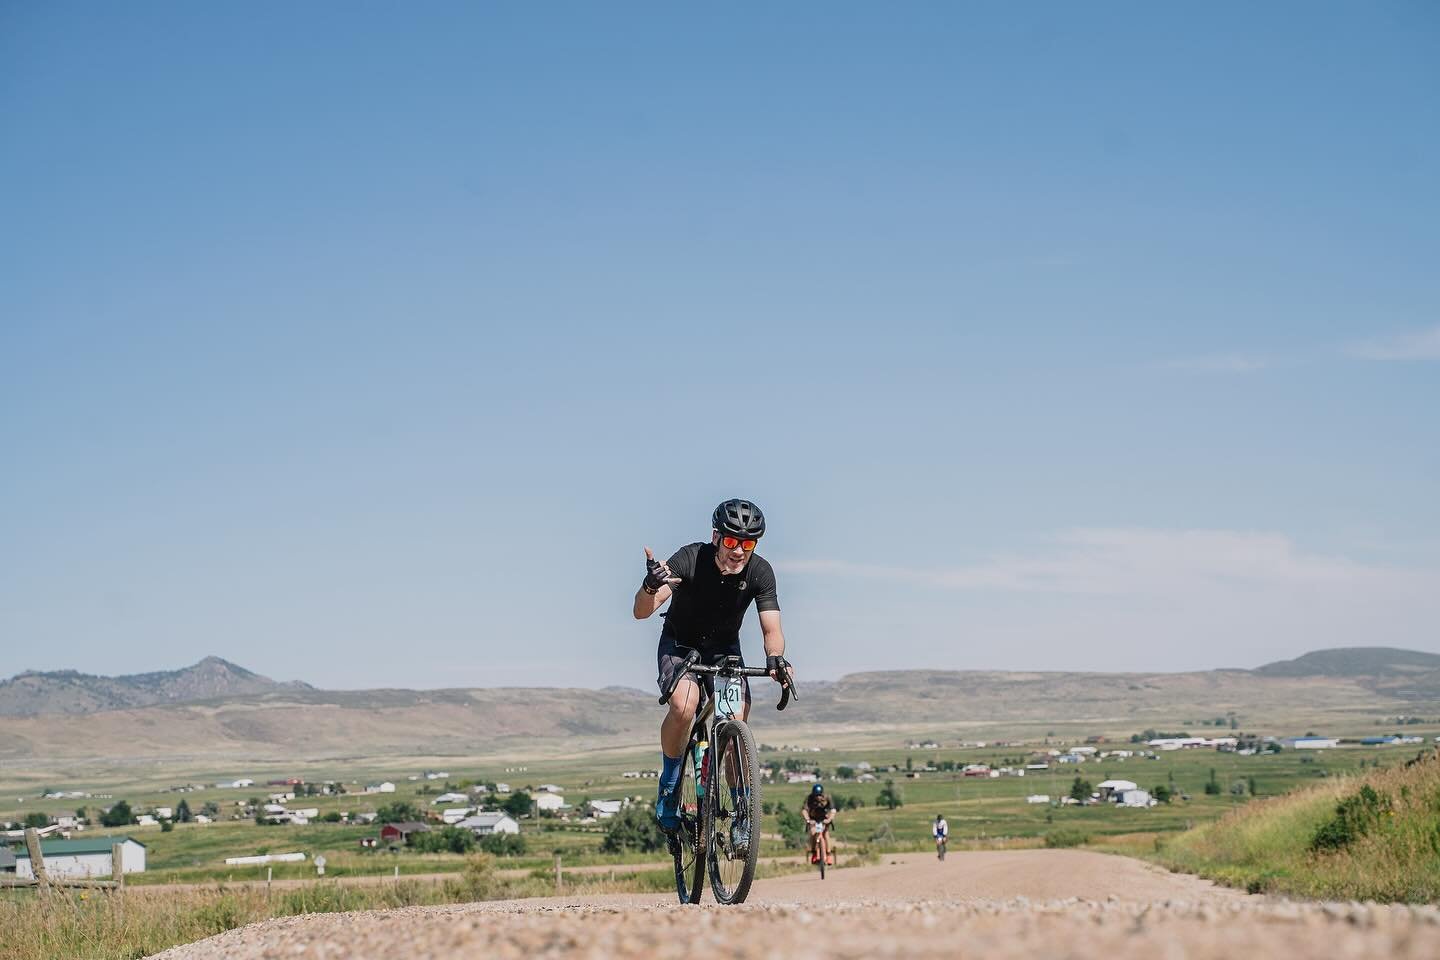 We&rsquo;re just a few days away from our first annual, very full Beginner&rsquo;s Clinic! And our FoCo Fondo x Fort Follies Women&rsquo;s Clinic is also full. Across both, we have 84 athletes taking on the challenge of leveling up skills and confide